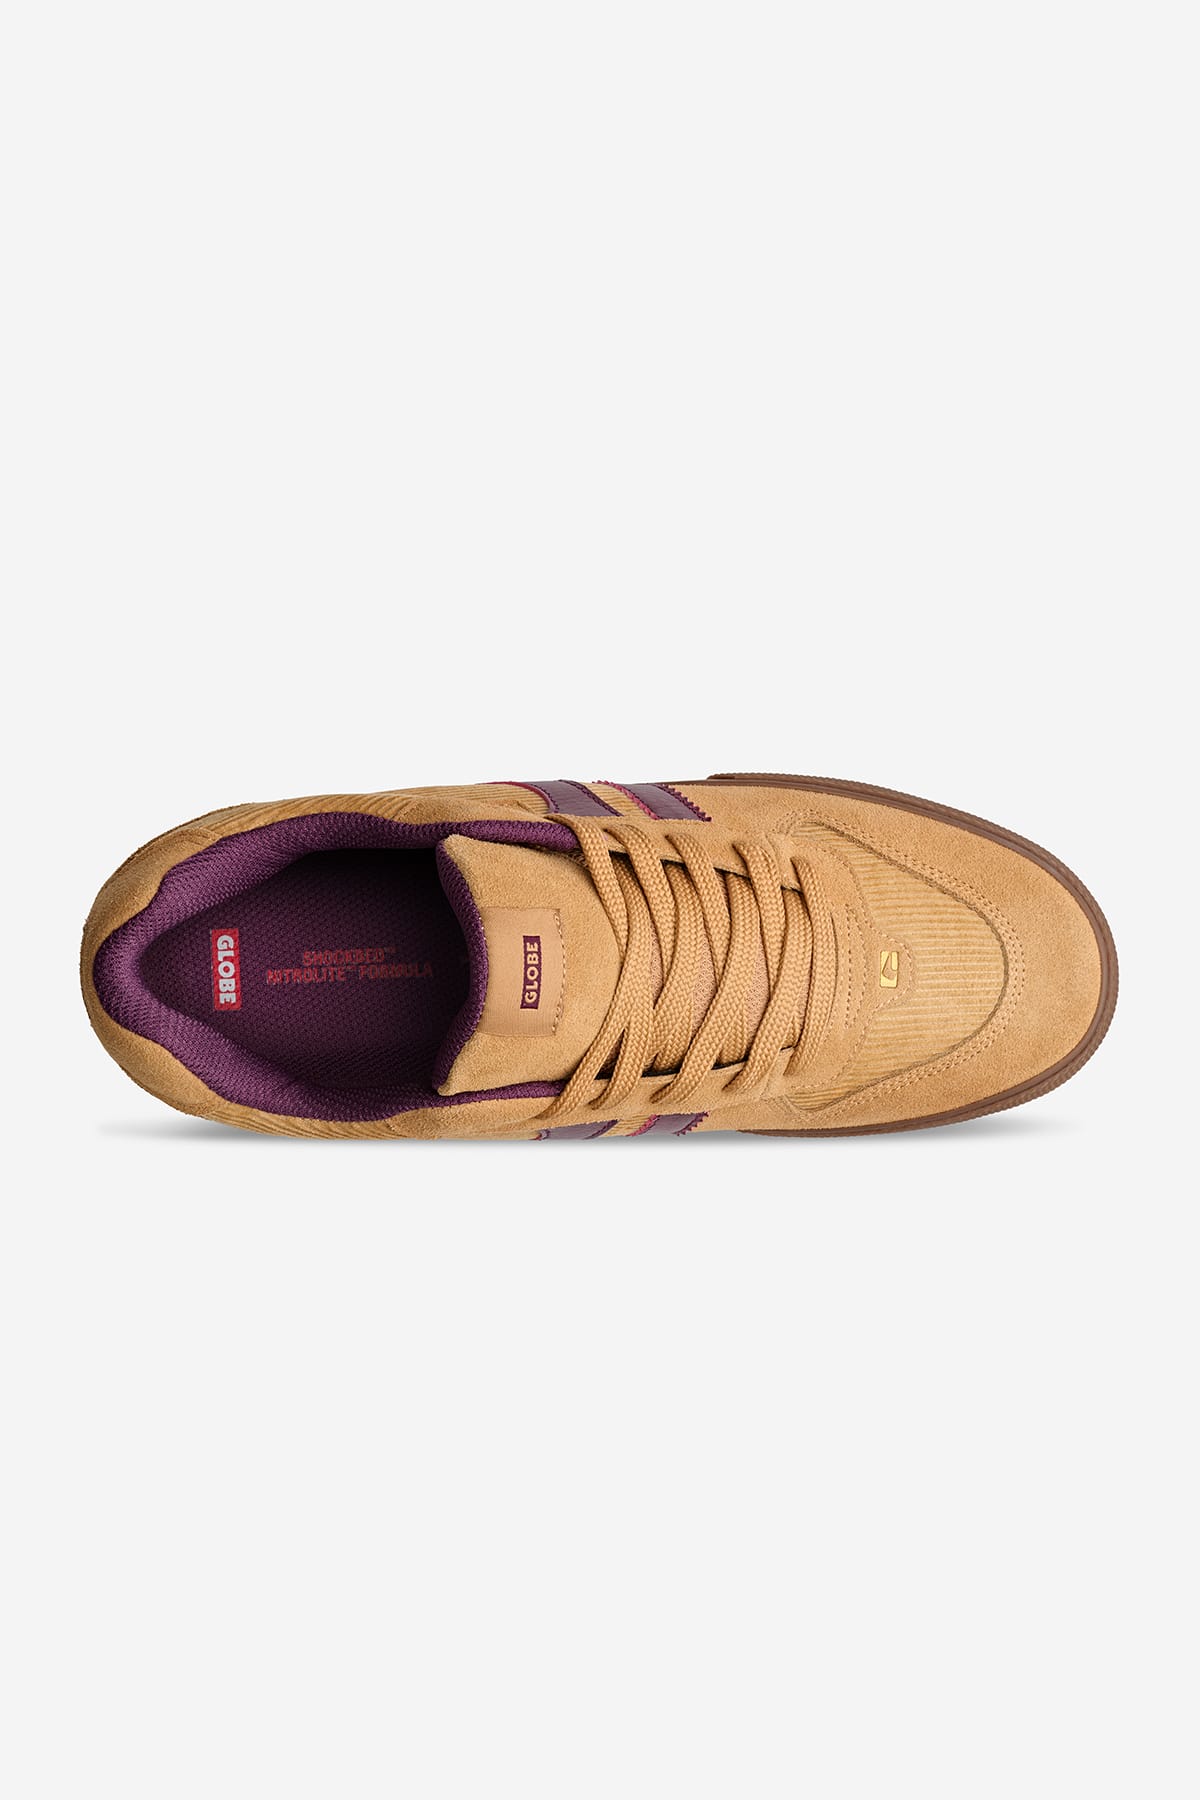 encore 2 curry wine skateboard chaussures